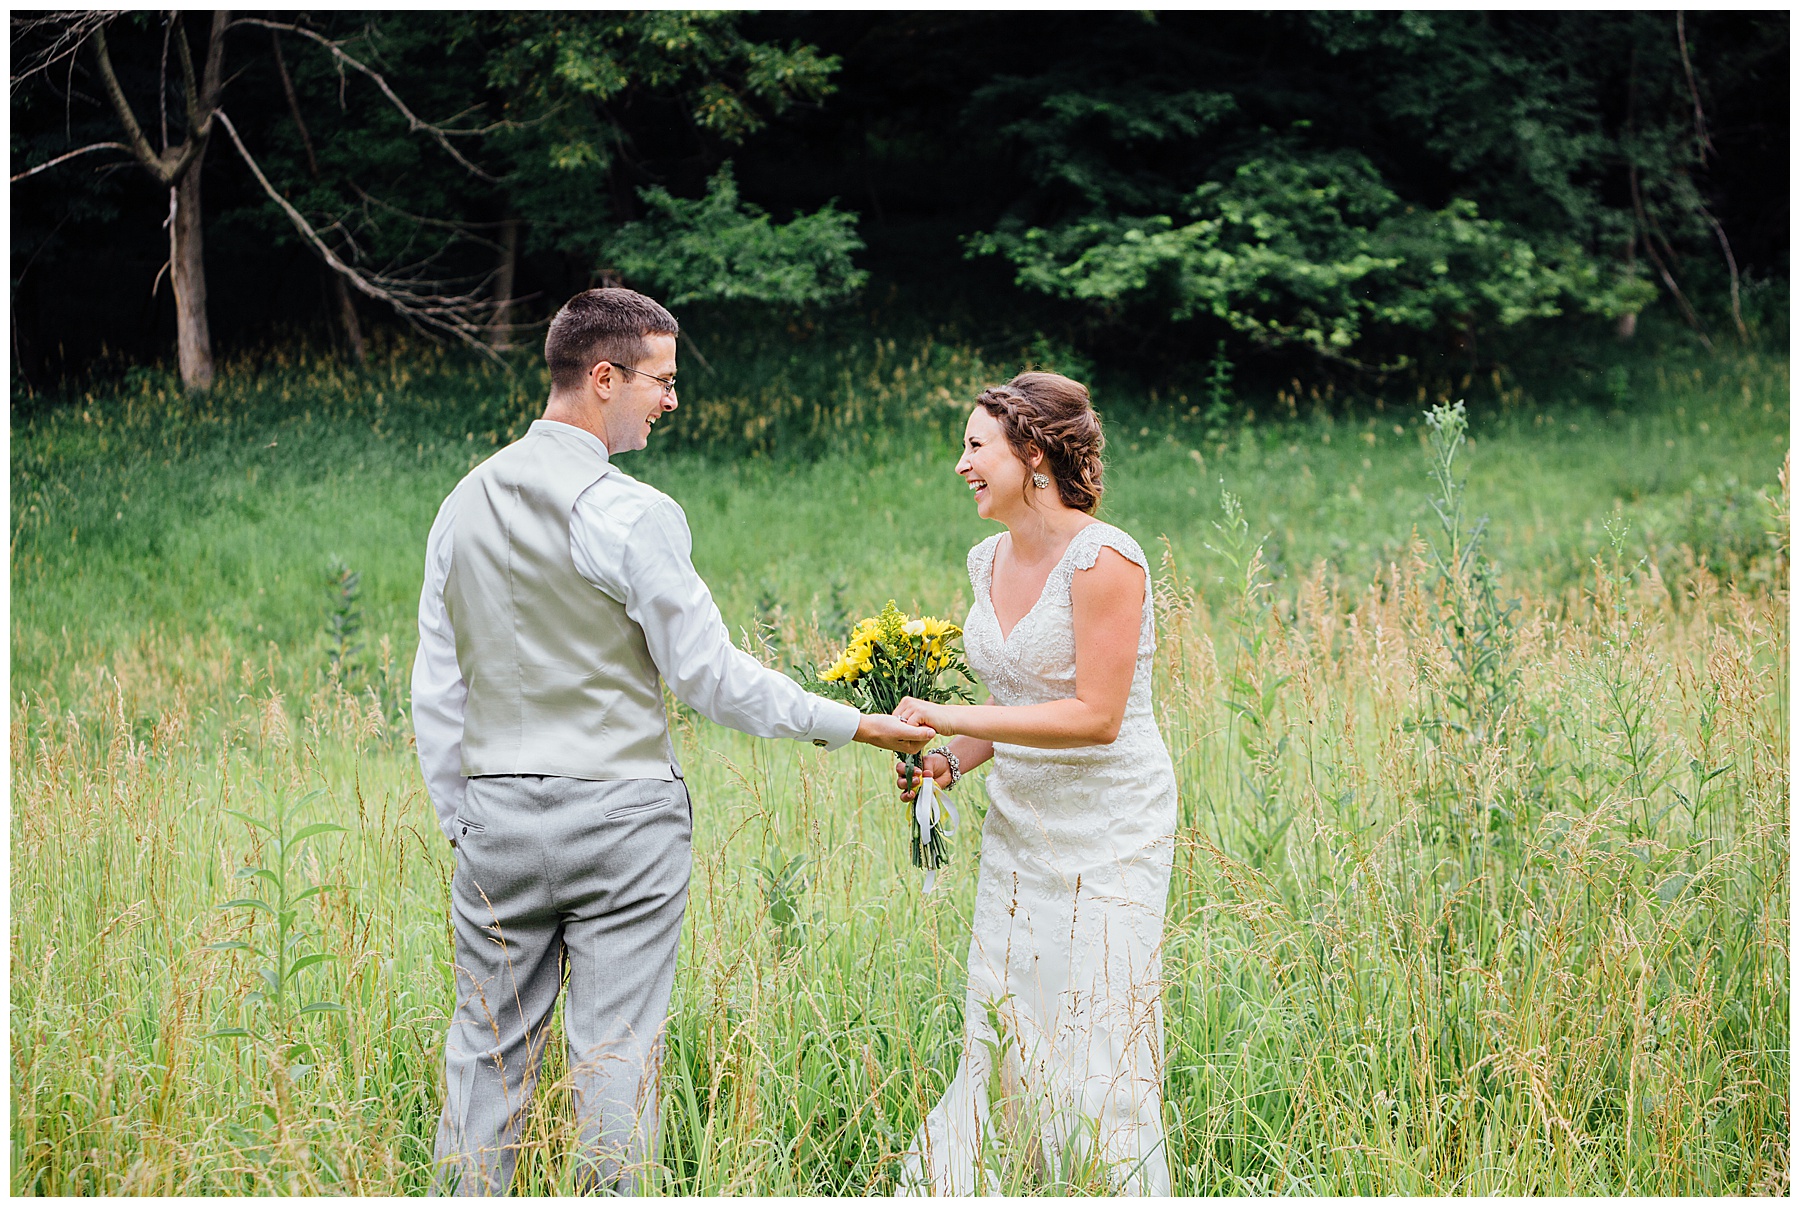 Fontenelle Forest.,Omaha wedding photographer,Small outdoor family wedding at Fontenelle Forest,Andrea Bibeault: a wedding photojournalist specializes in real,photojournalistic wedding photography. Based in Omaha,we travel all over the midwest and country.,